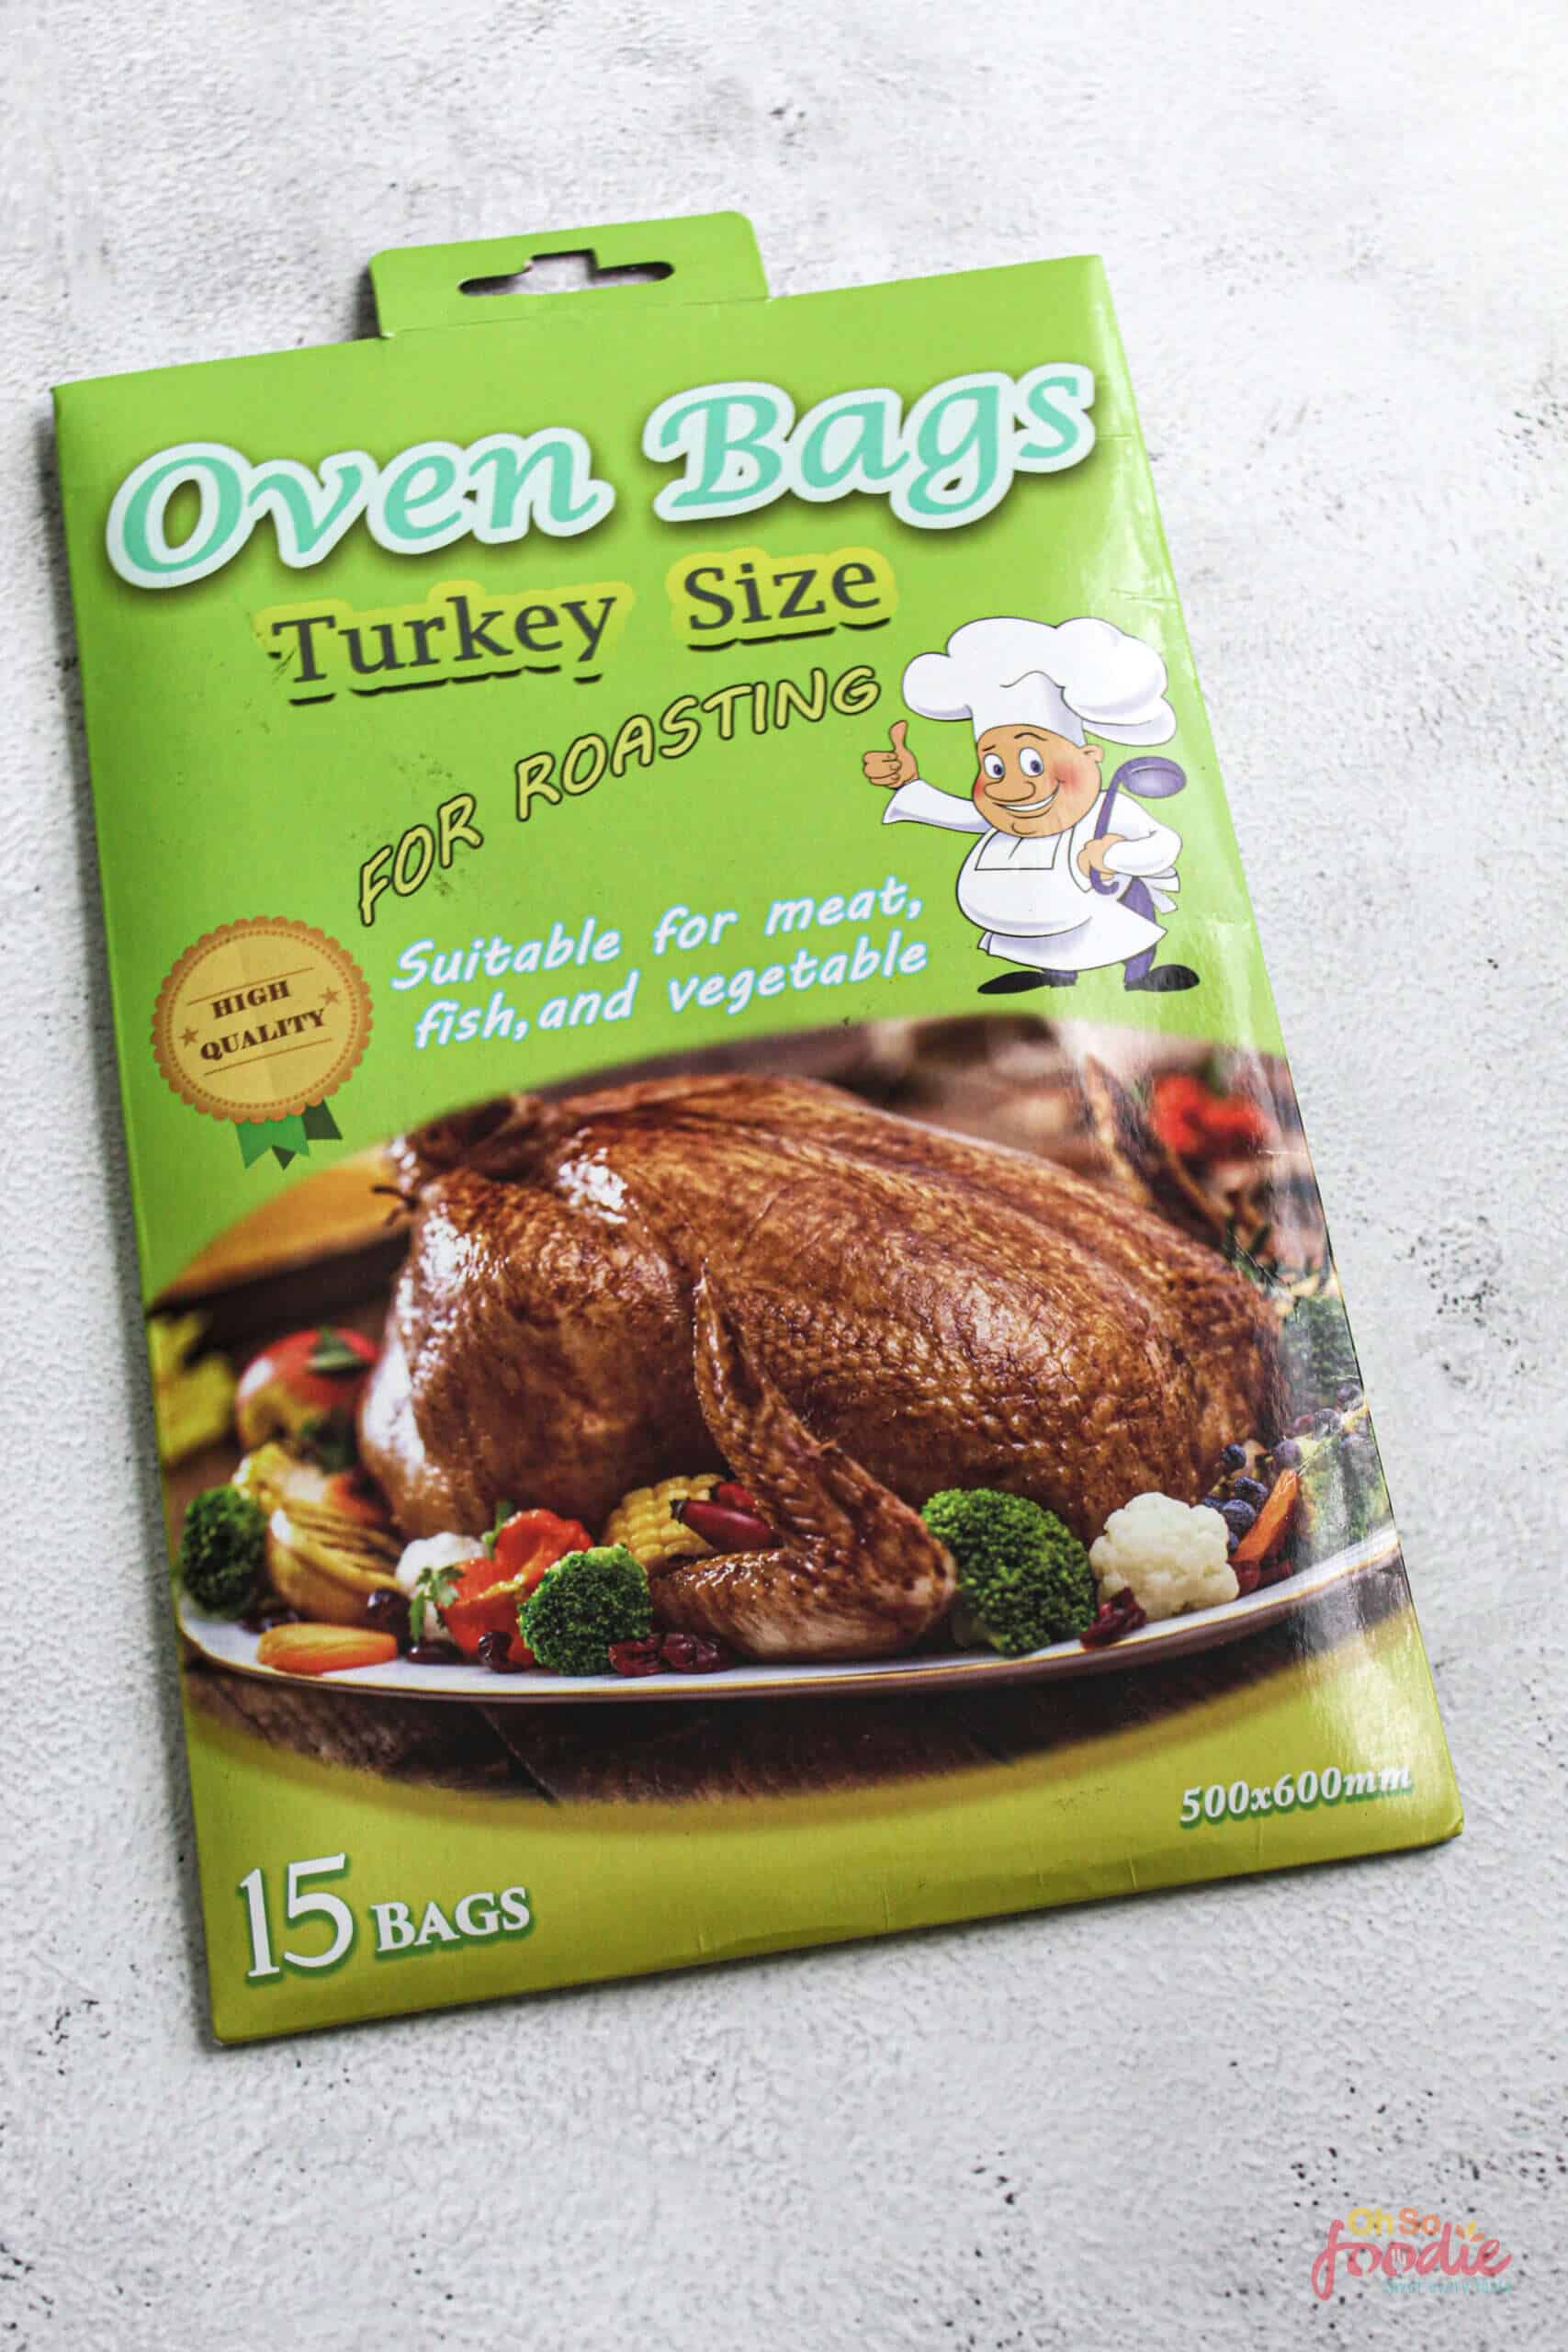 Large oven bags